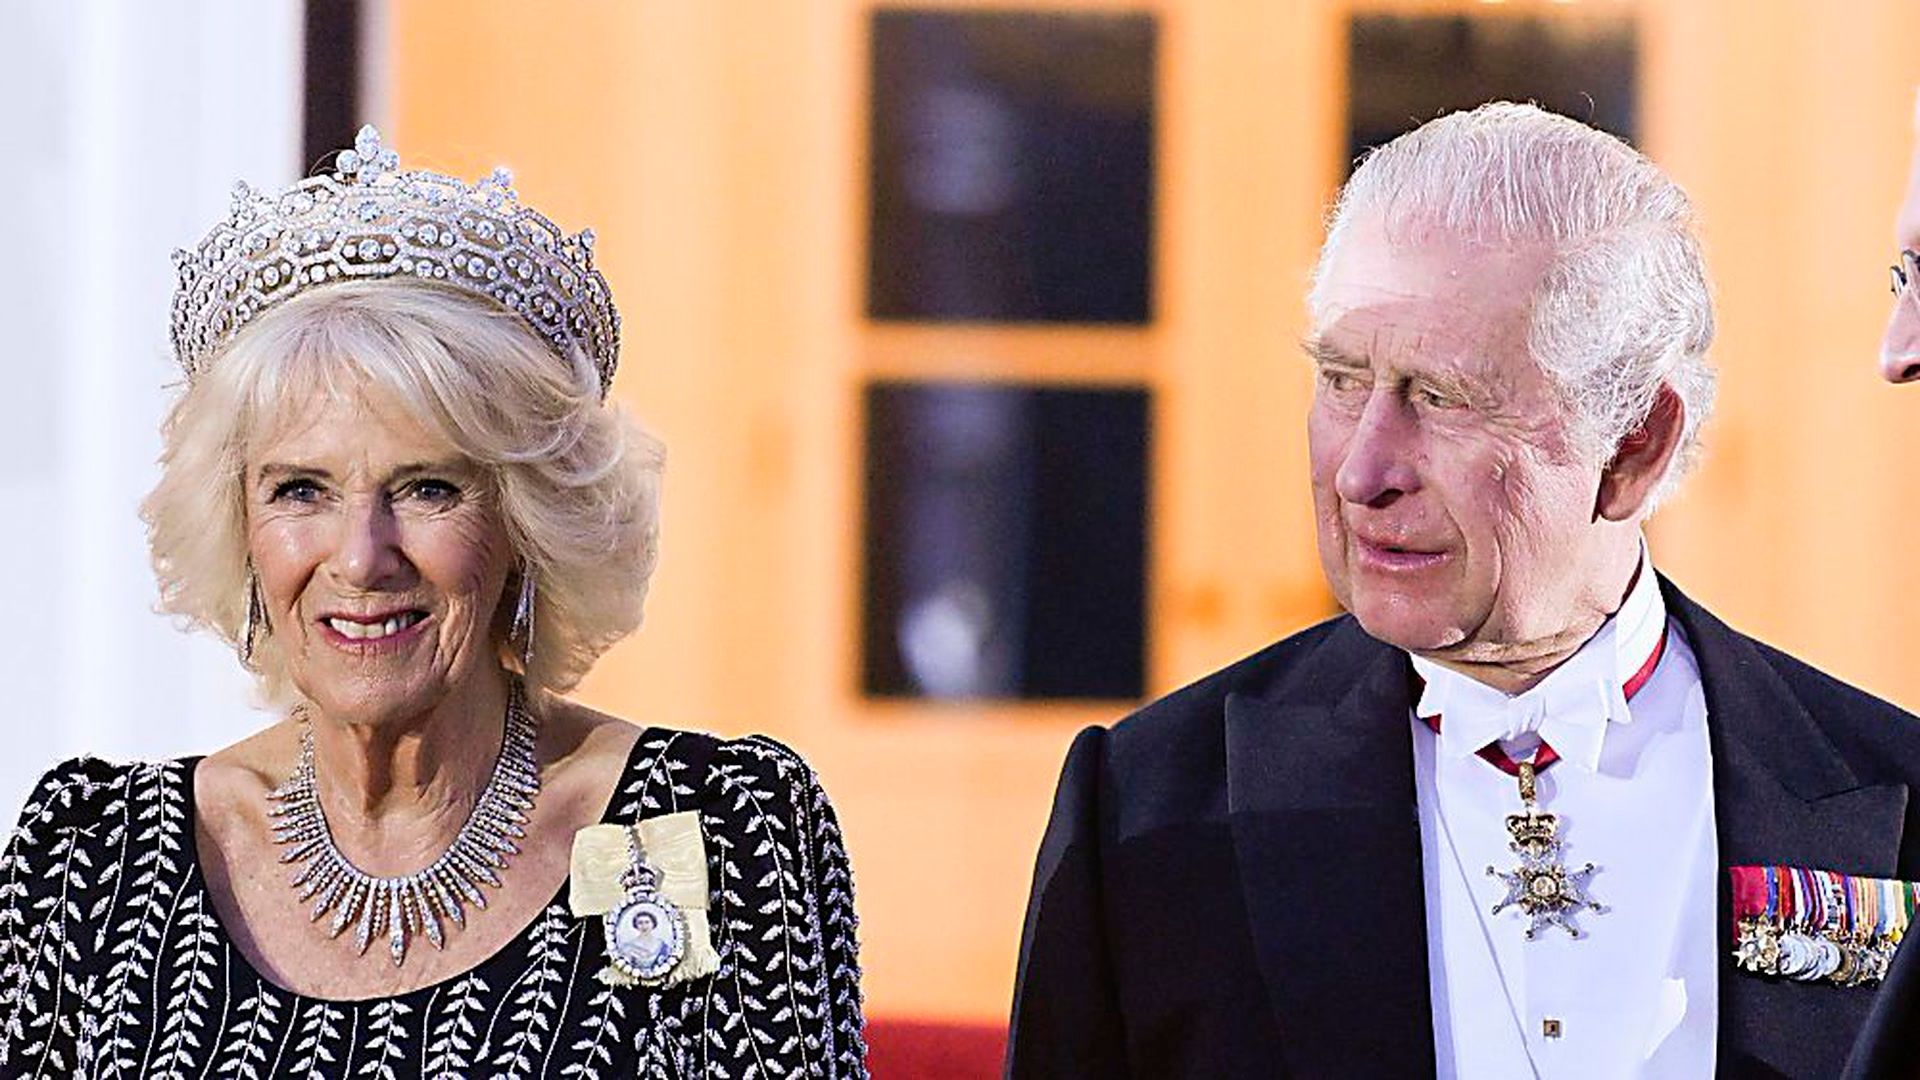 Camilla at state banquet: Her tiara has special meaning